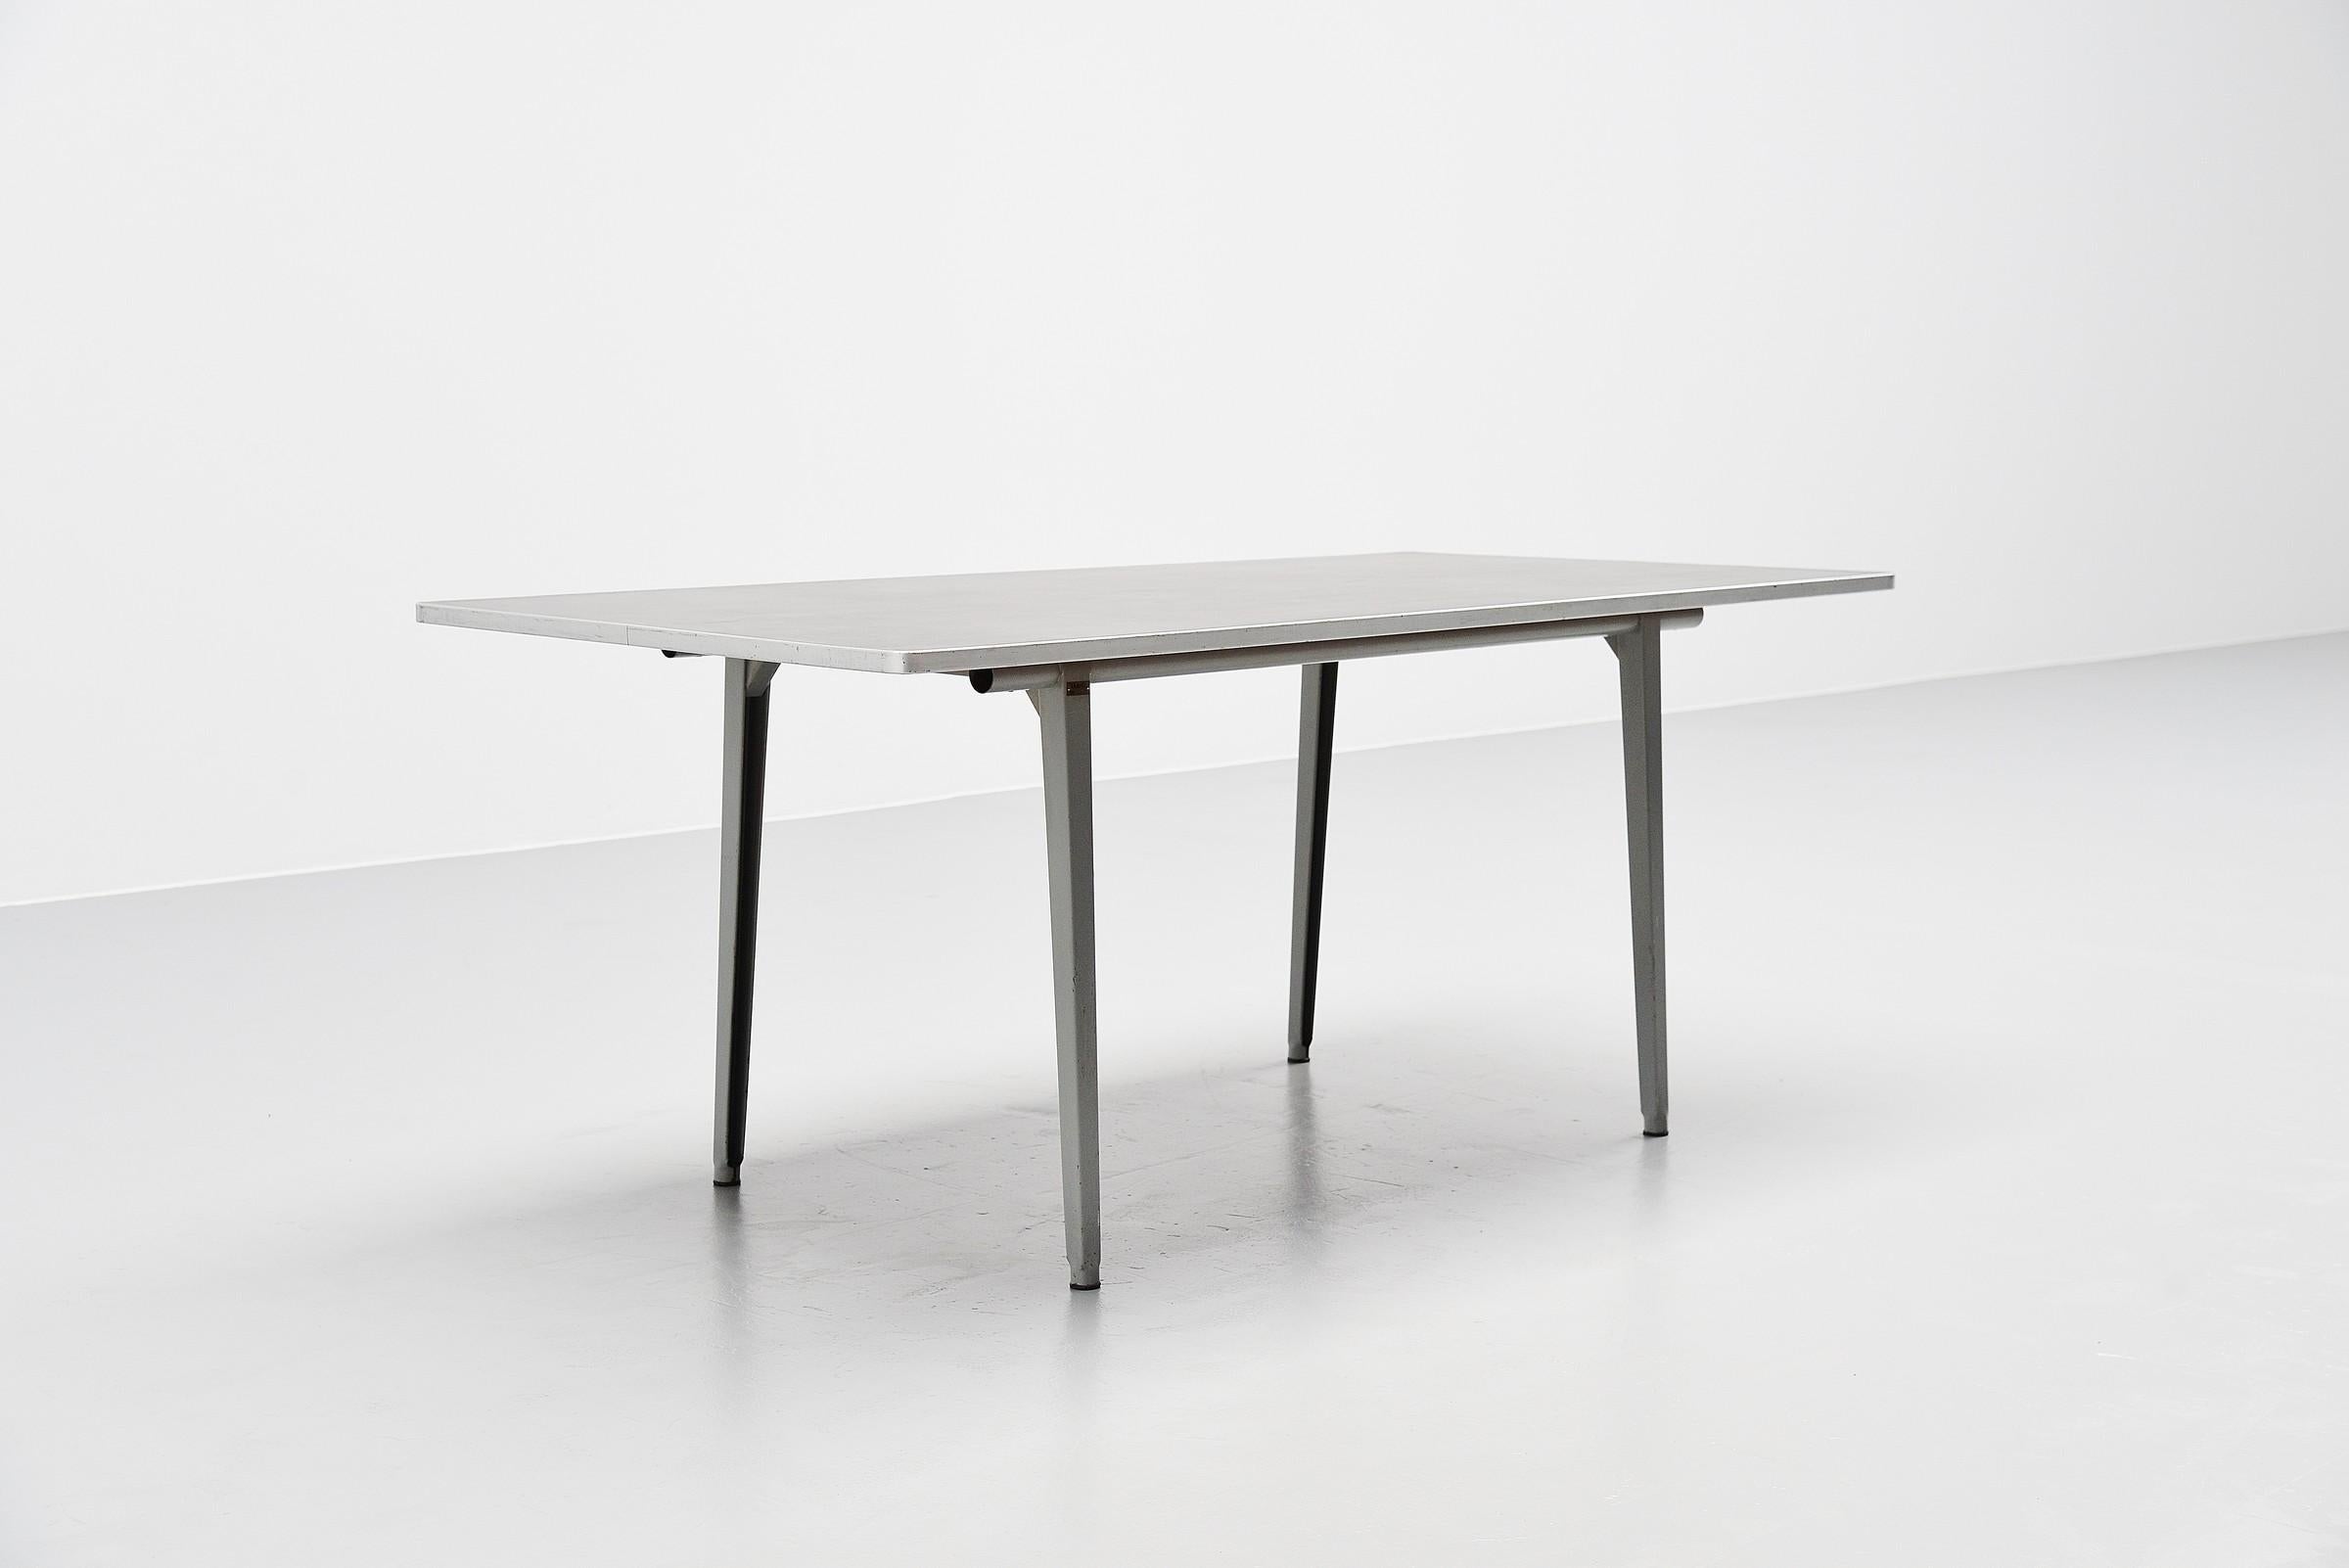 Nice medium and rare sized Industrial 'Reform' table designed by Friso Kramer for Ahrend de Cirkel, Holland 1955. This dining table was a part of the Reform table program that was designed by Friso Kramer in 1955. The Reform series contained a lot